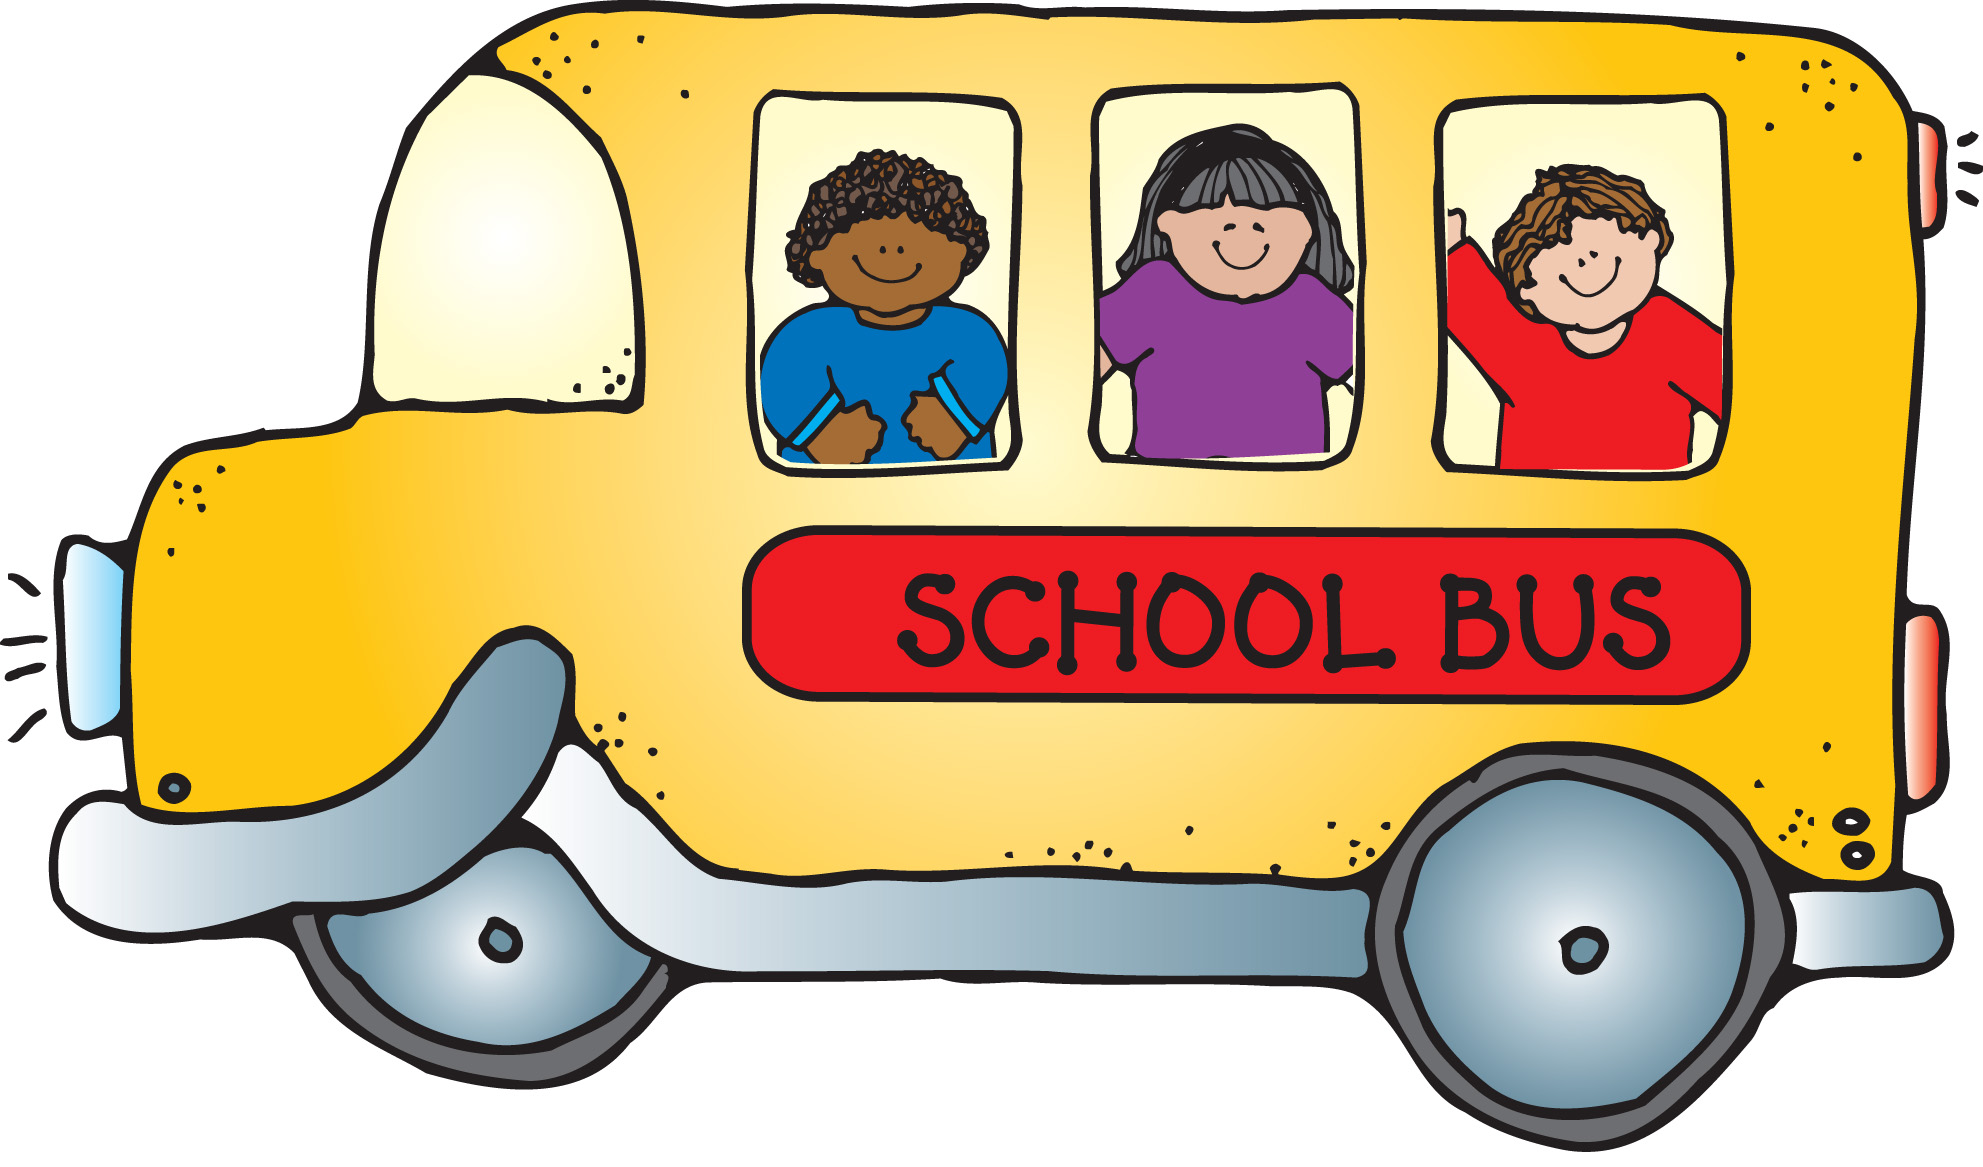 free clipart of a school bus - photo #45